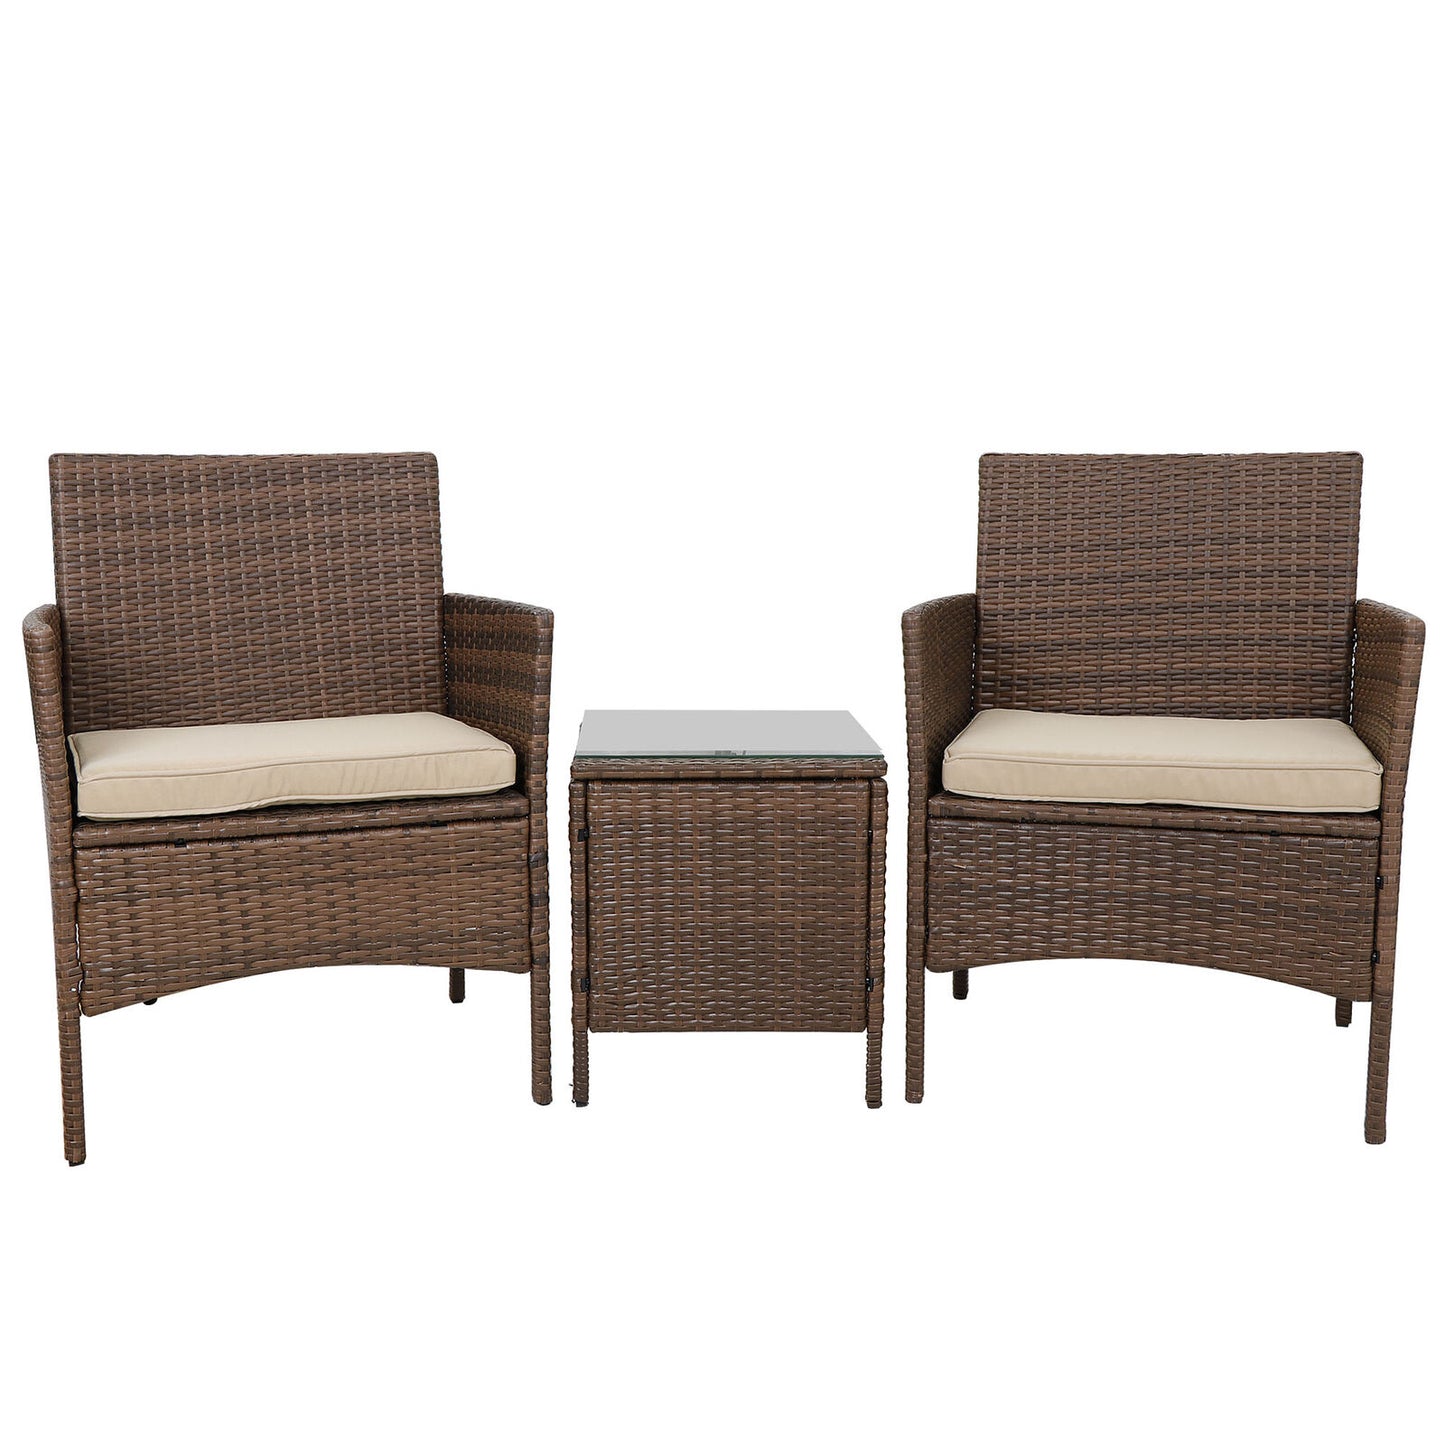 Patio Porch Furniture Sets 3 Pieces PE Rattan Wicker Chairs w/ Table